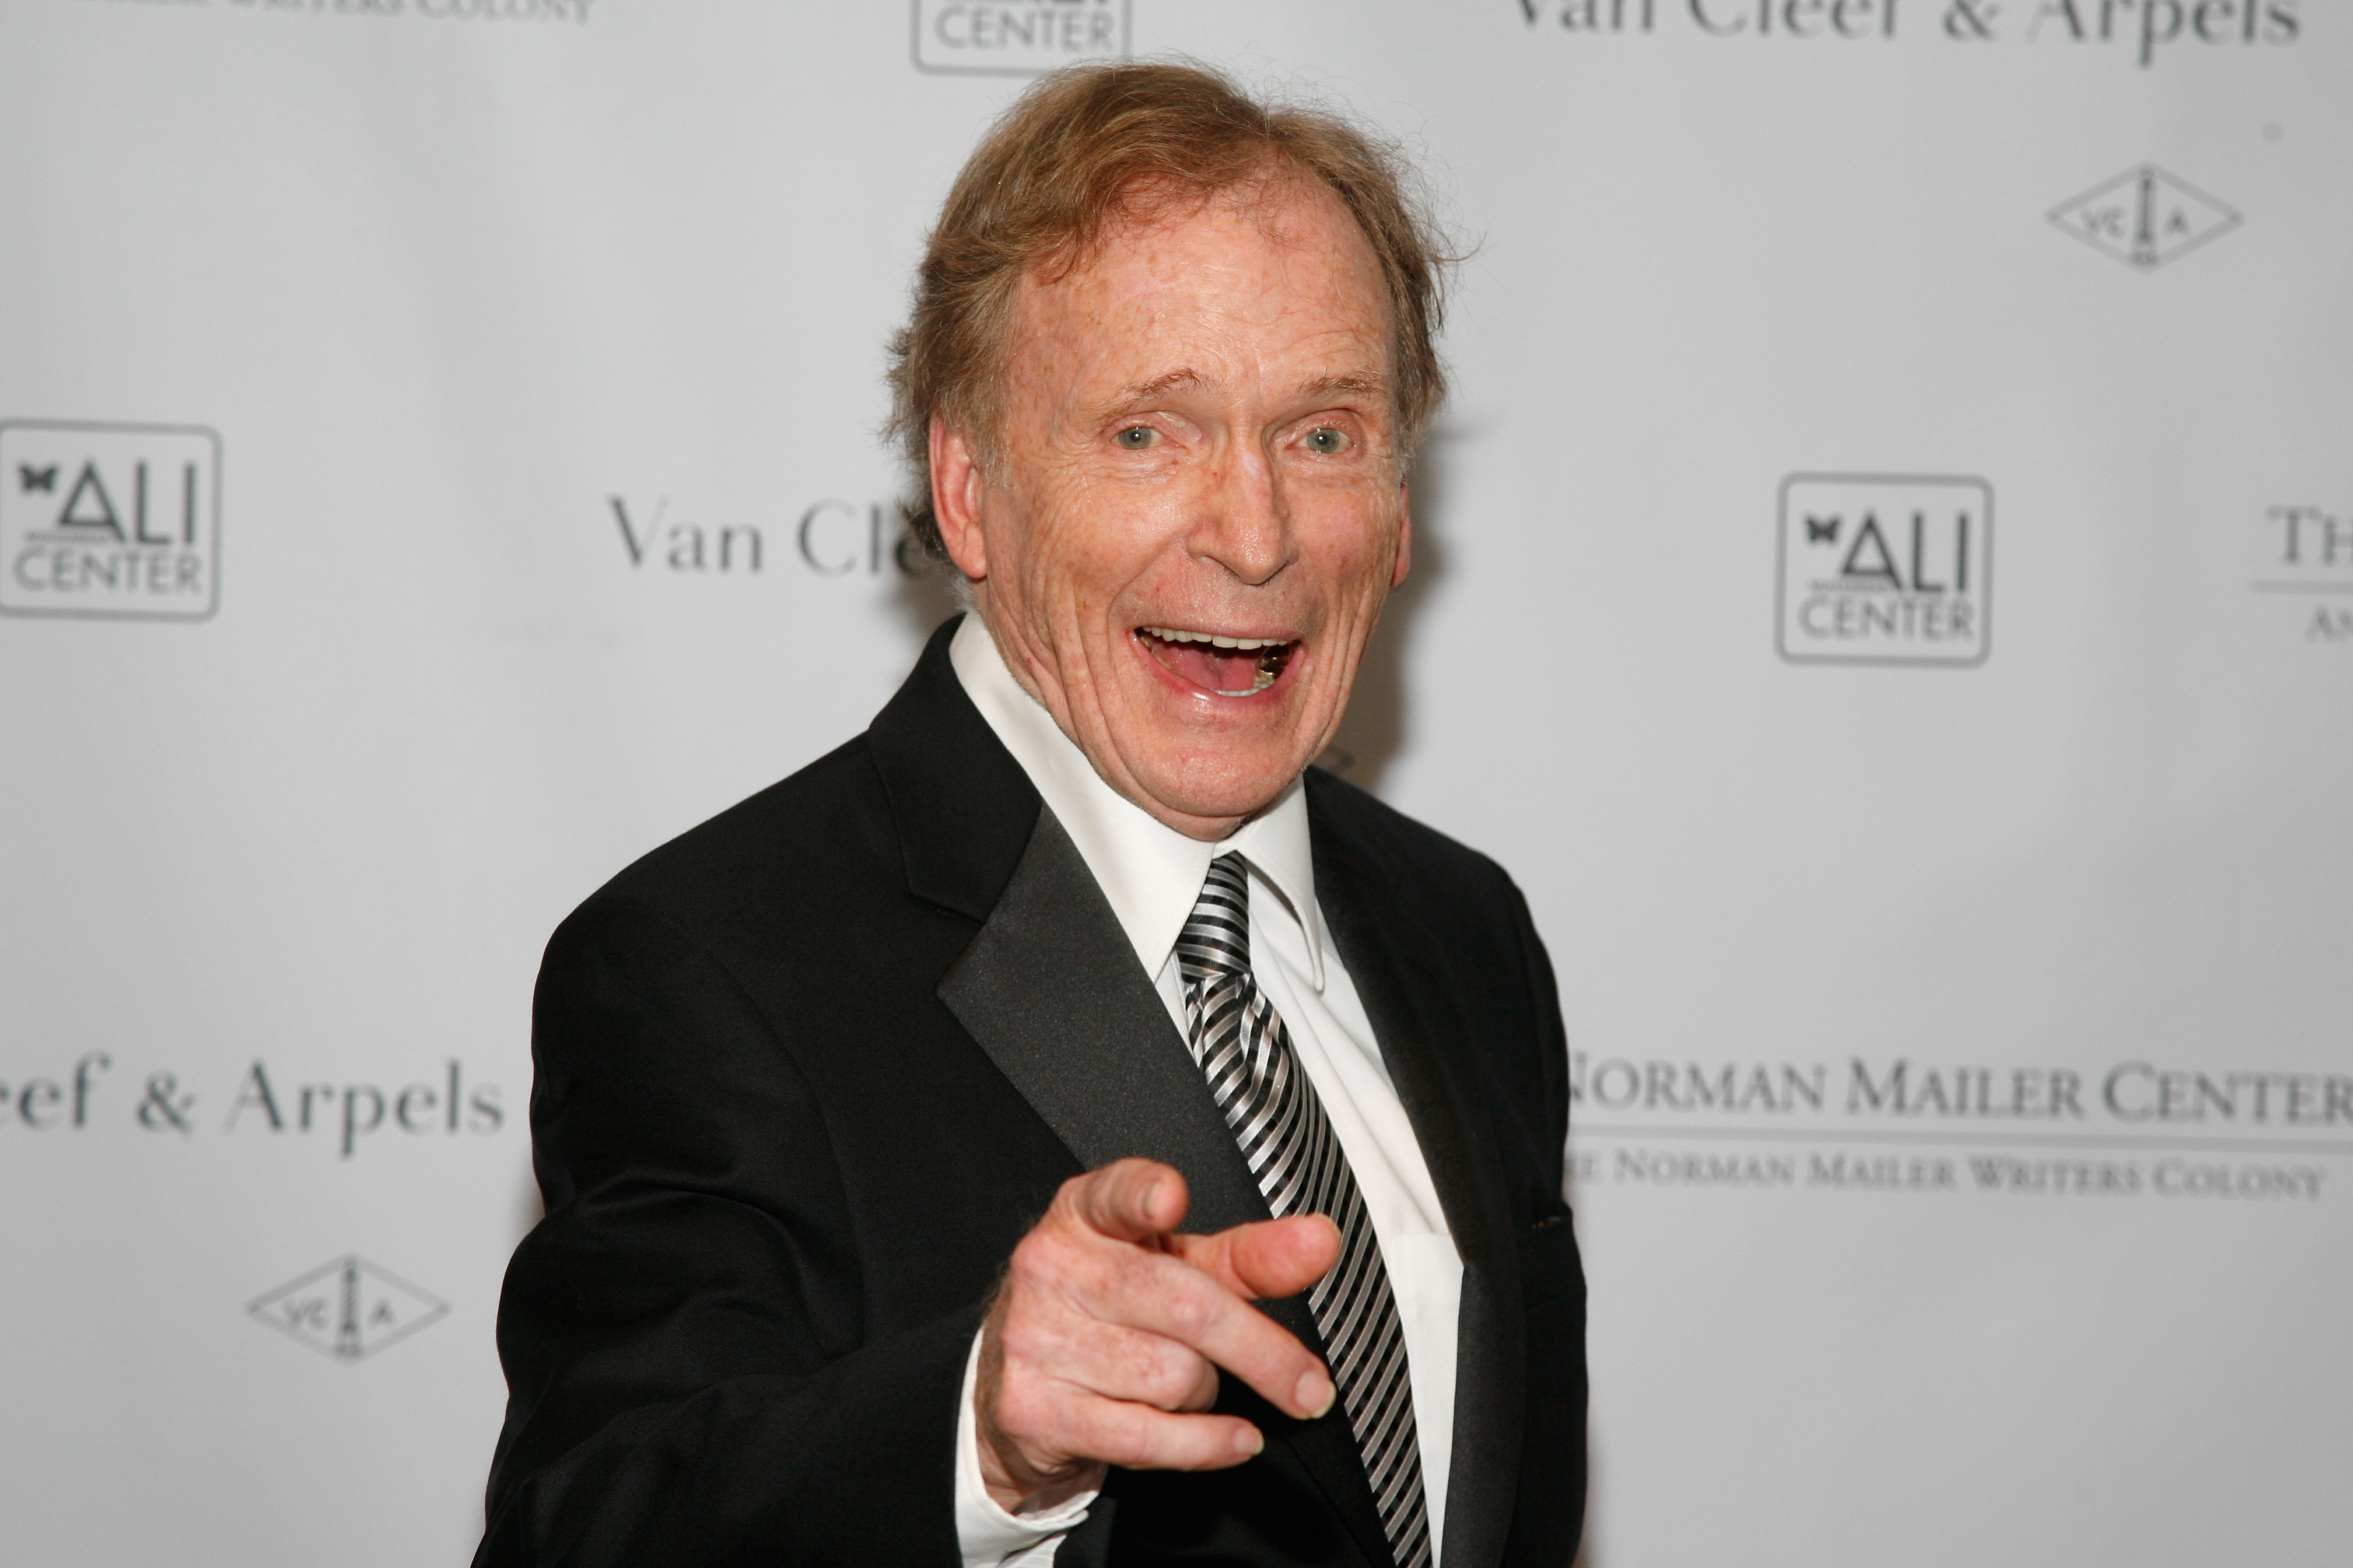 Dick Cavett Gets Kicky | The Dinner Party Download